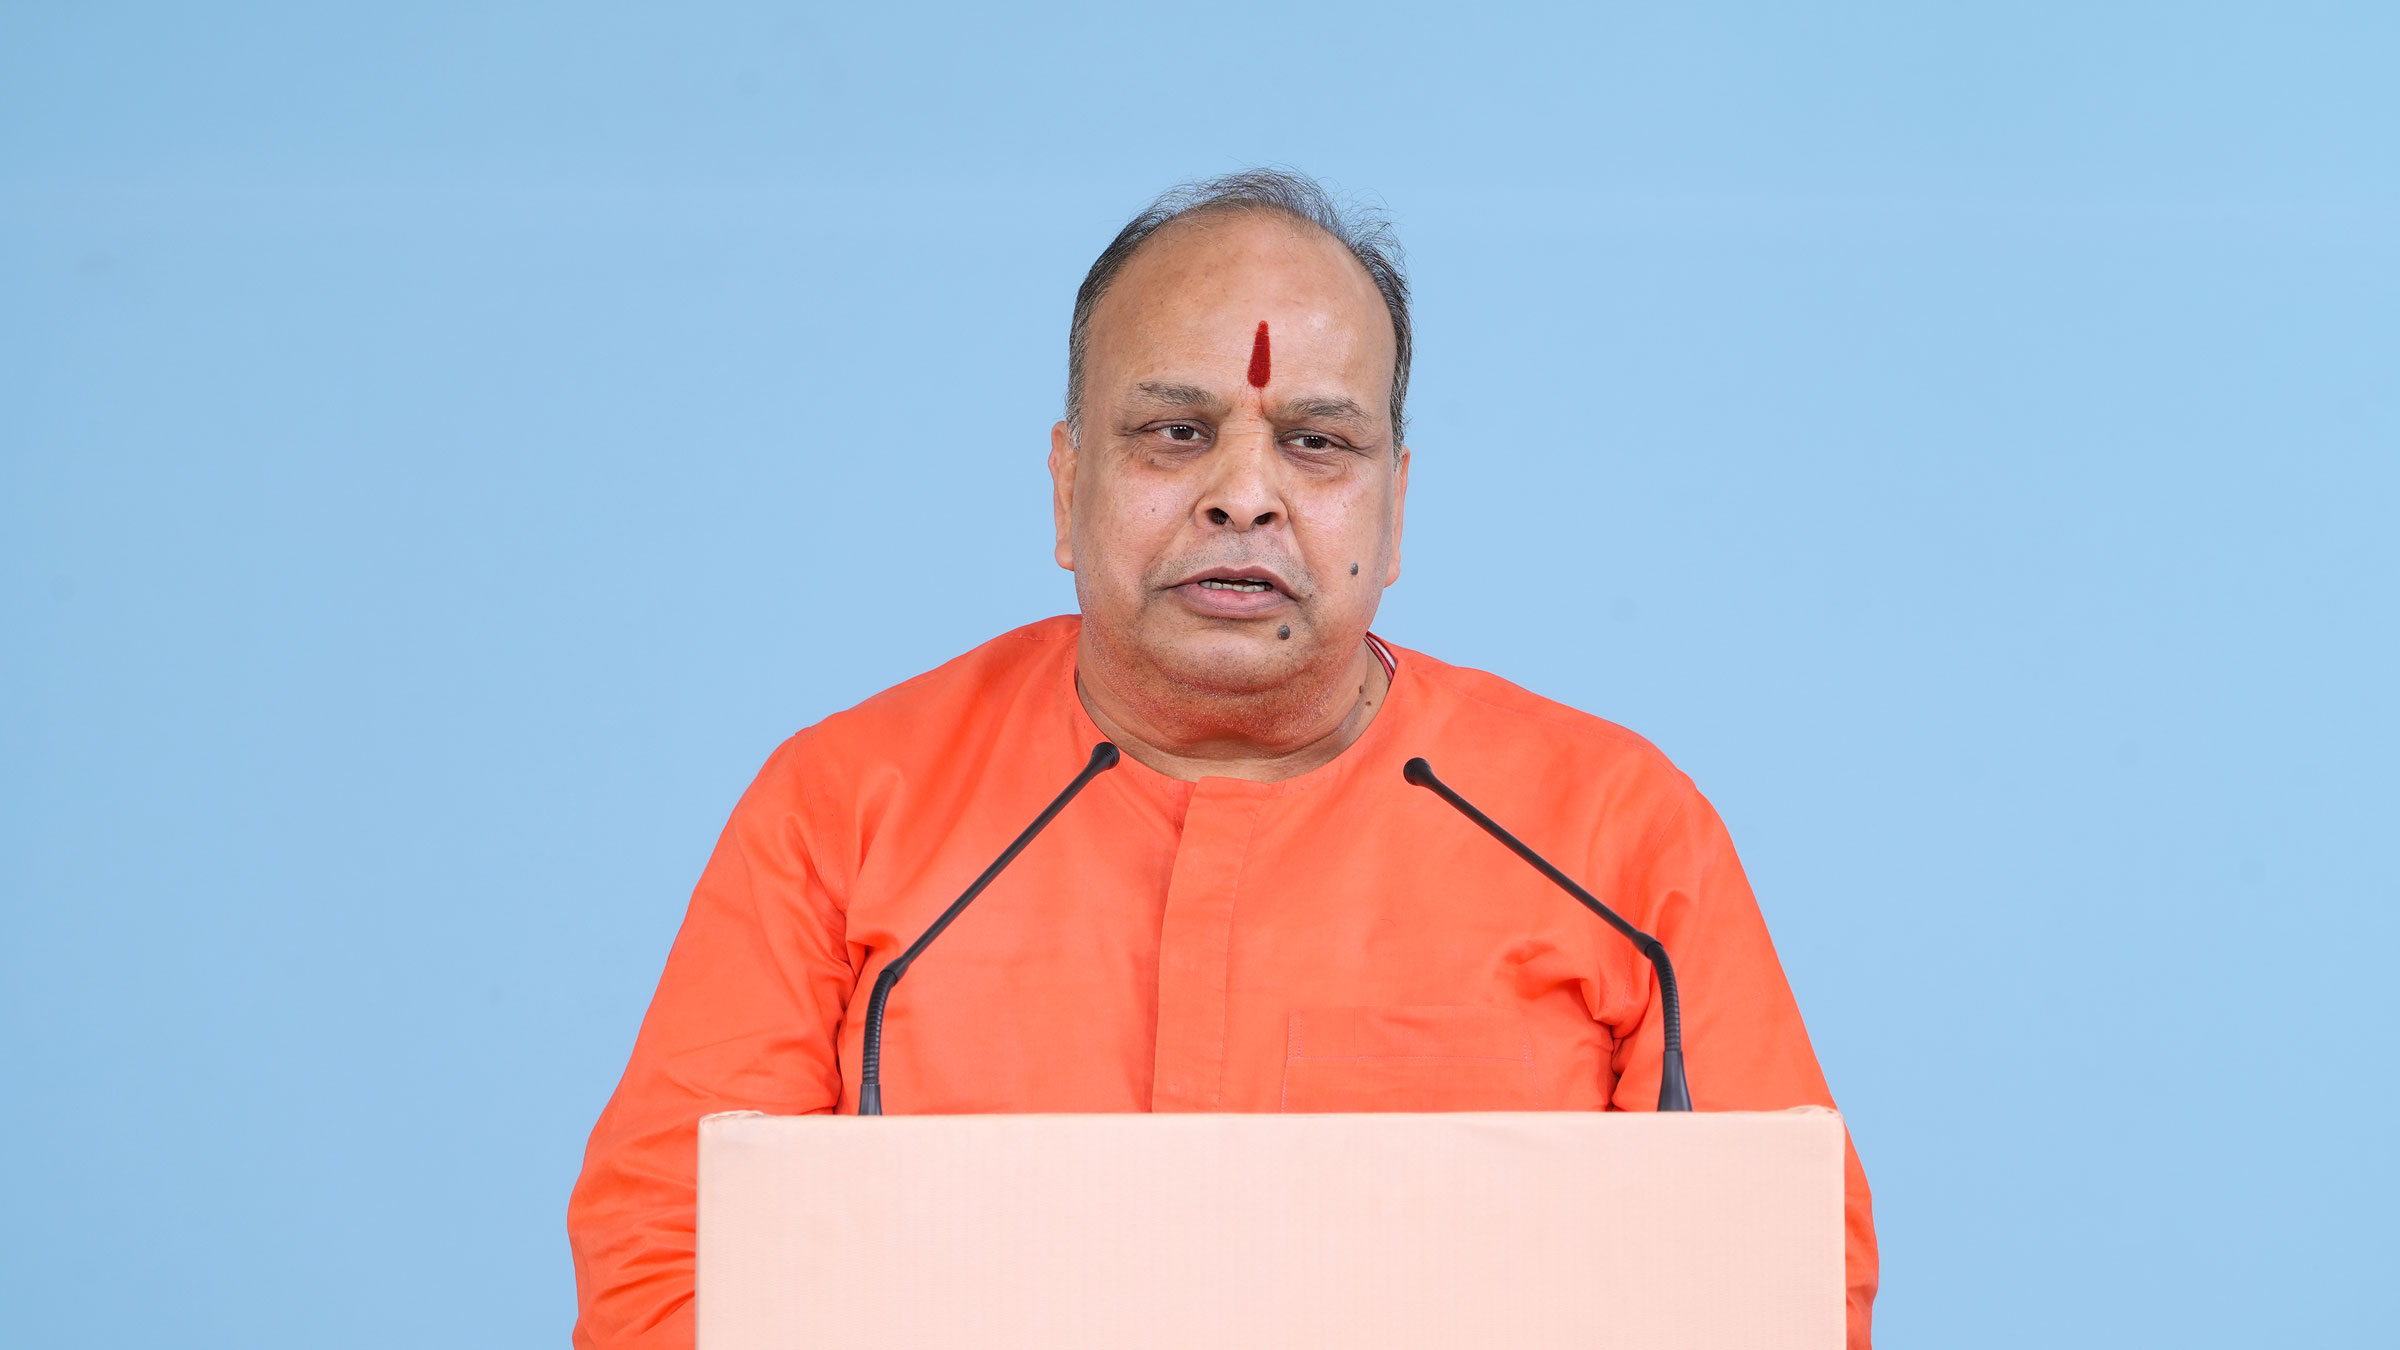 H.H. Pradeep Khemka (Dharmapracharak Saint, Sanatan Sanstha, Jharkhand) narrating what He experienced while making efforts to create an organisation of businessmen and Devout Hindus in Jharkhand. He added – ‘Every individual must perform spiritual practice while being active in his/her field’.